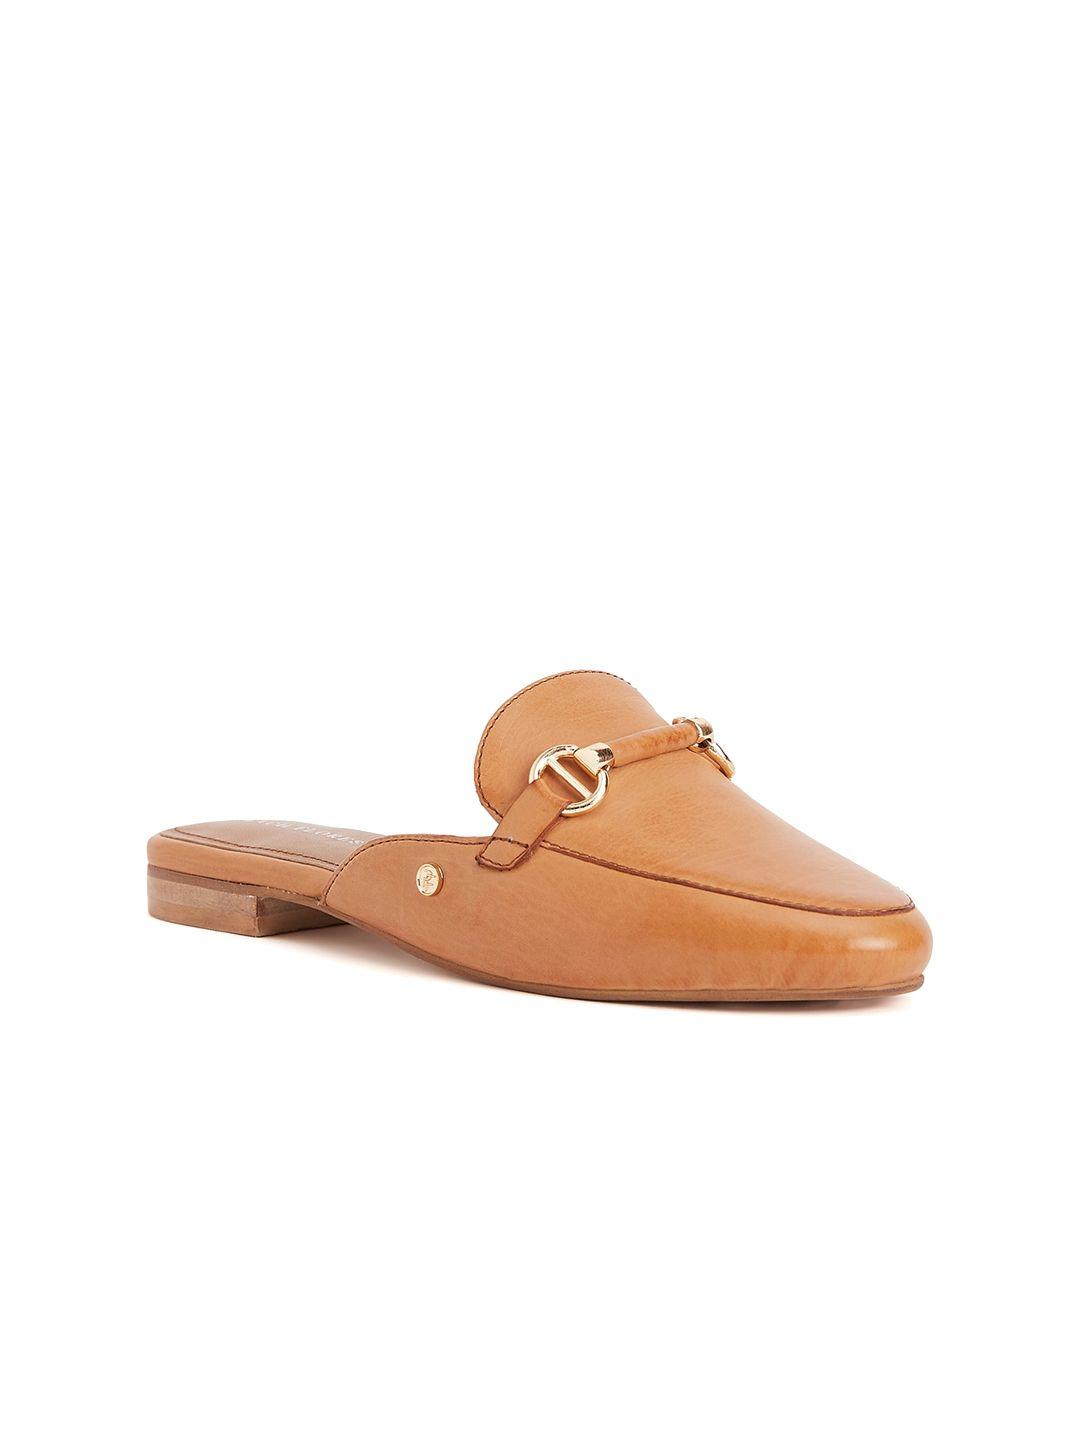 peach flores women solid leather mules